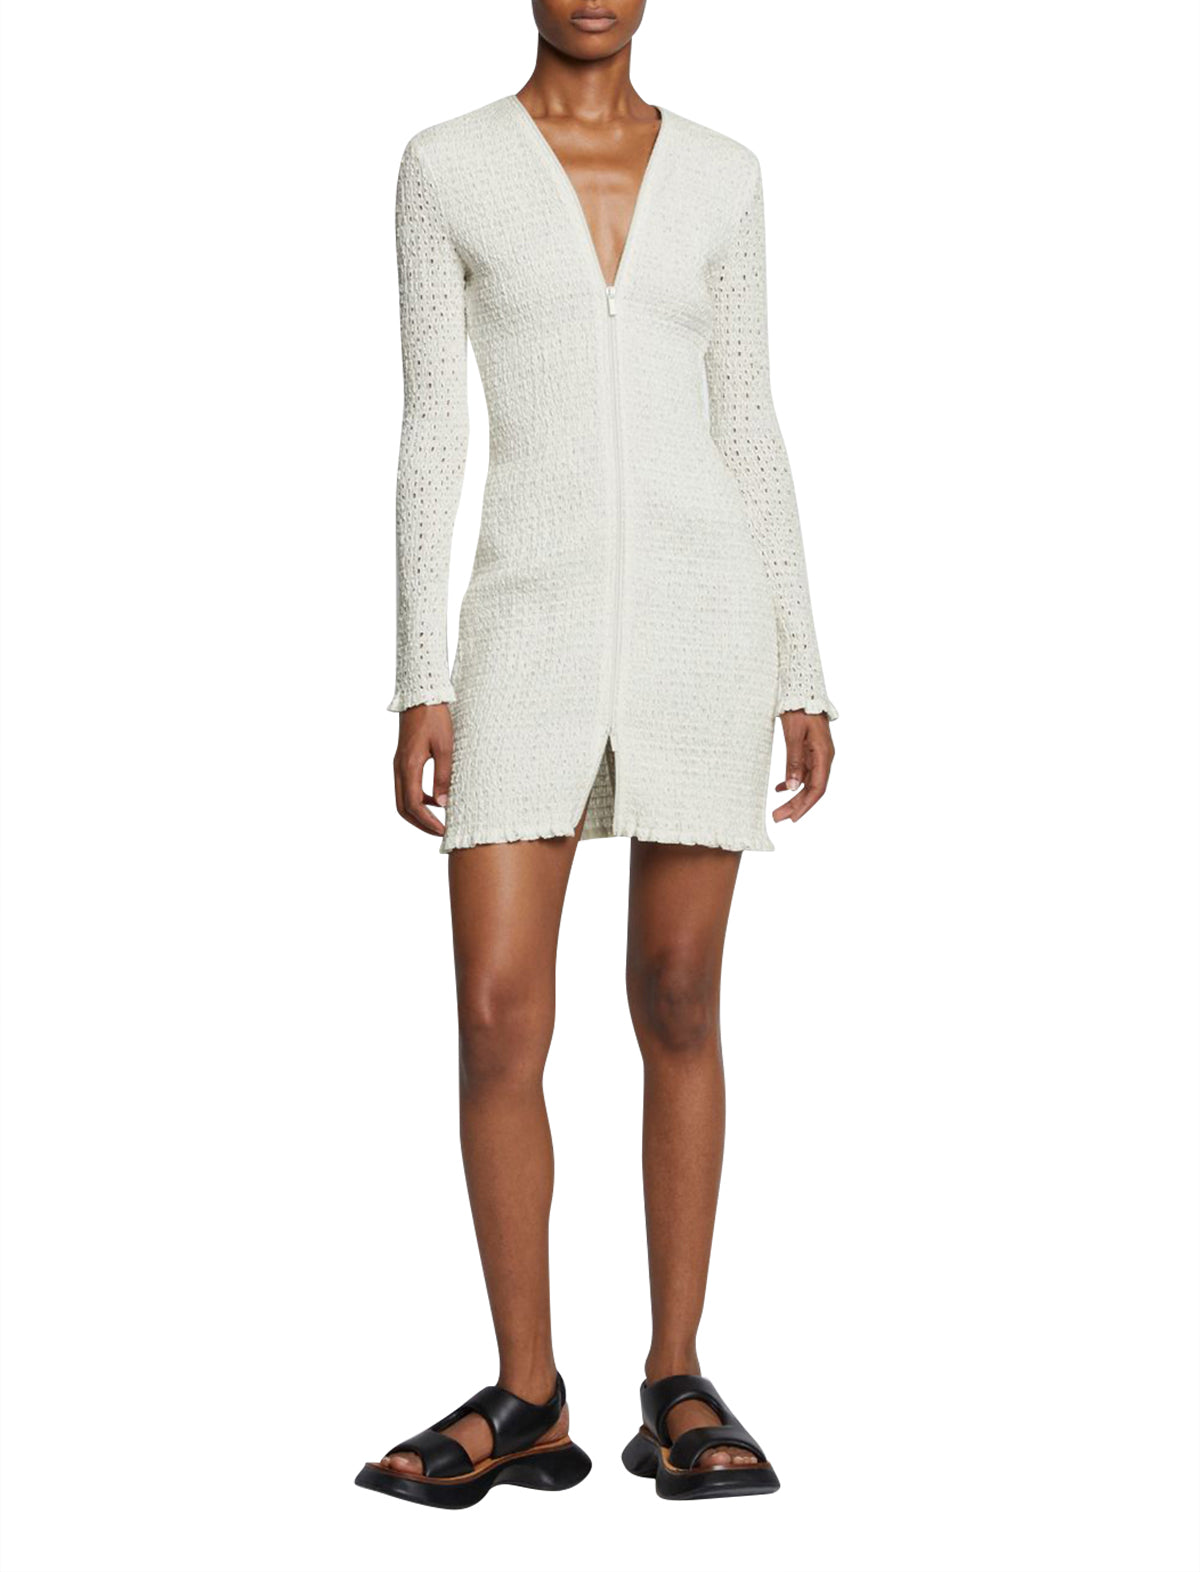 PROENZA SCHOULER WHITE LABEL Broderie Anglaise Dress in Off-White